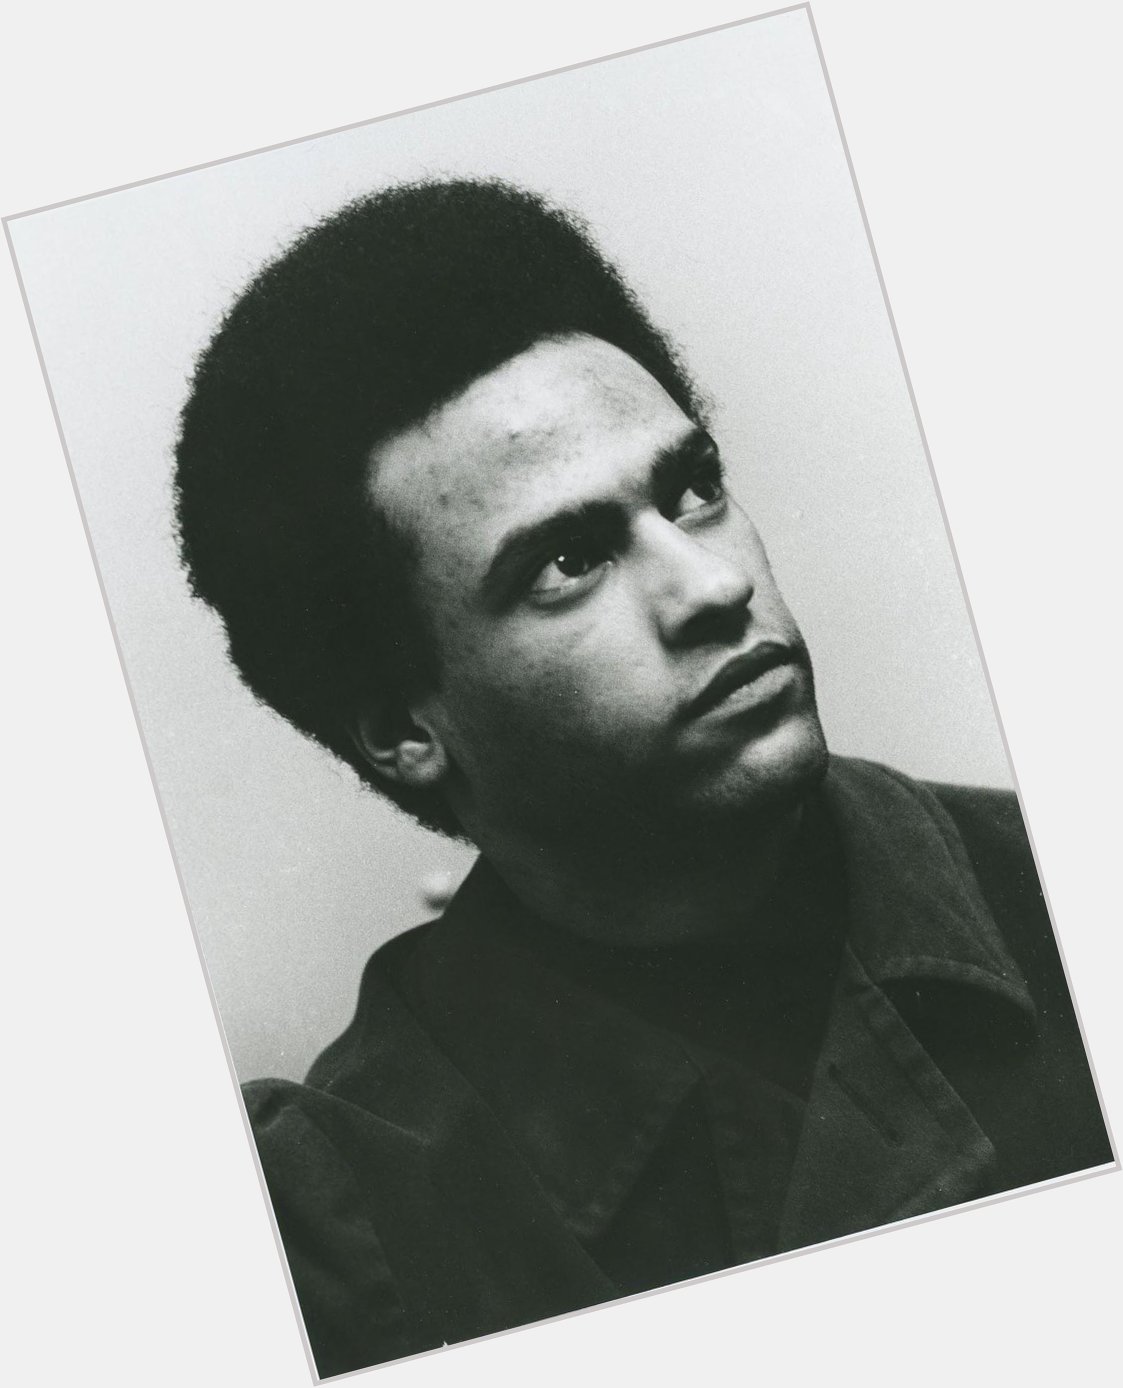 Today in Black History: Happy birthday to Huey P. Newton, co-founder of the Black Panther party. 